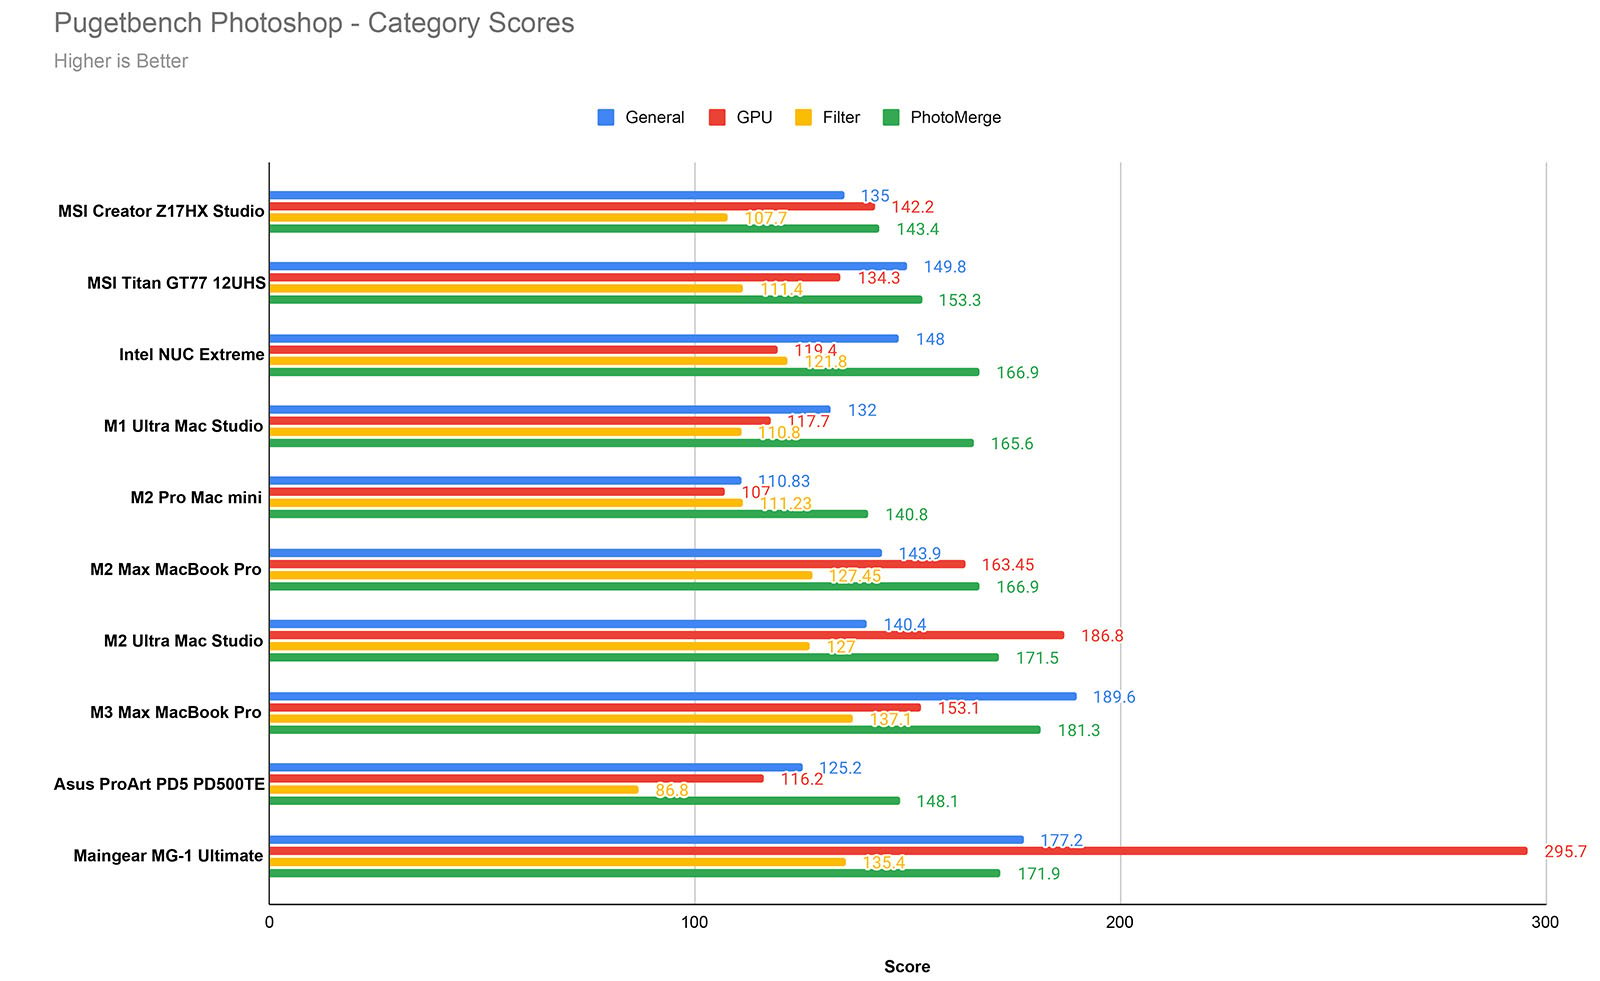 A bar chart titled "PugetBench Photoshop - Category Scores" showing scores for 16 different computer models across four categories: General, GPU, Filter, and Photomerge. Each category is color-coded, with longer bars indicating higher scores.